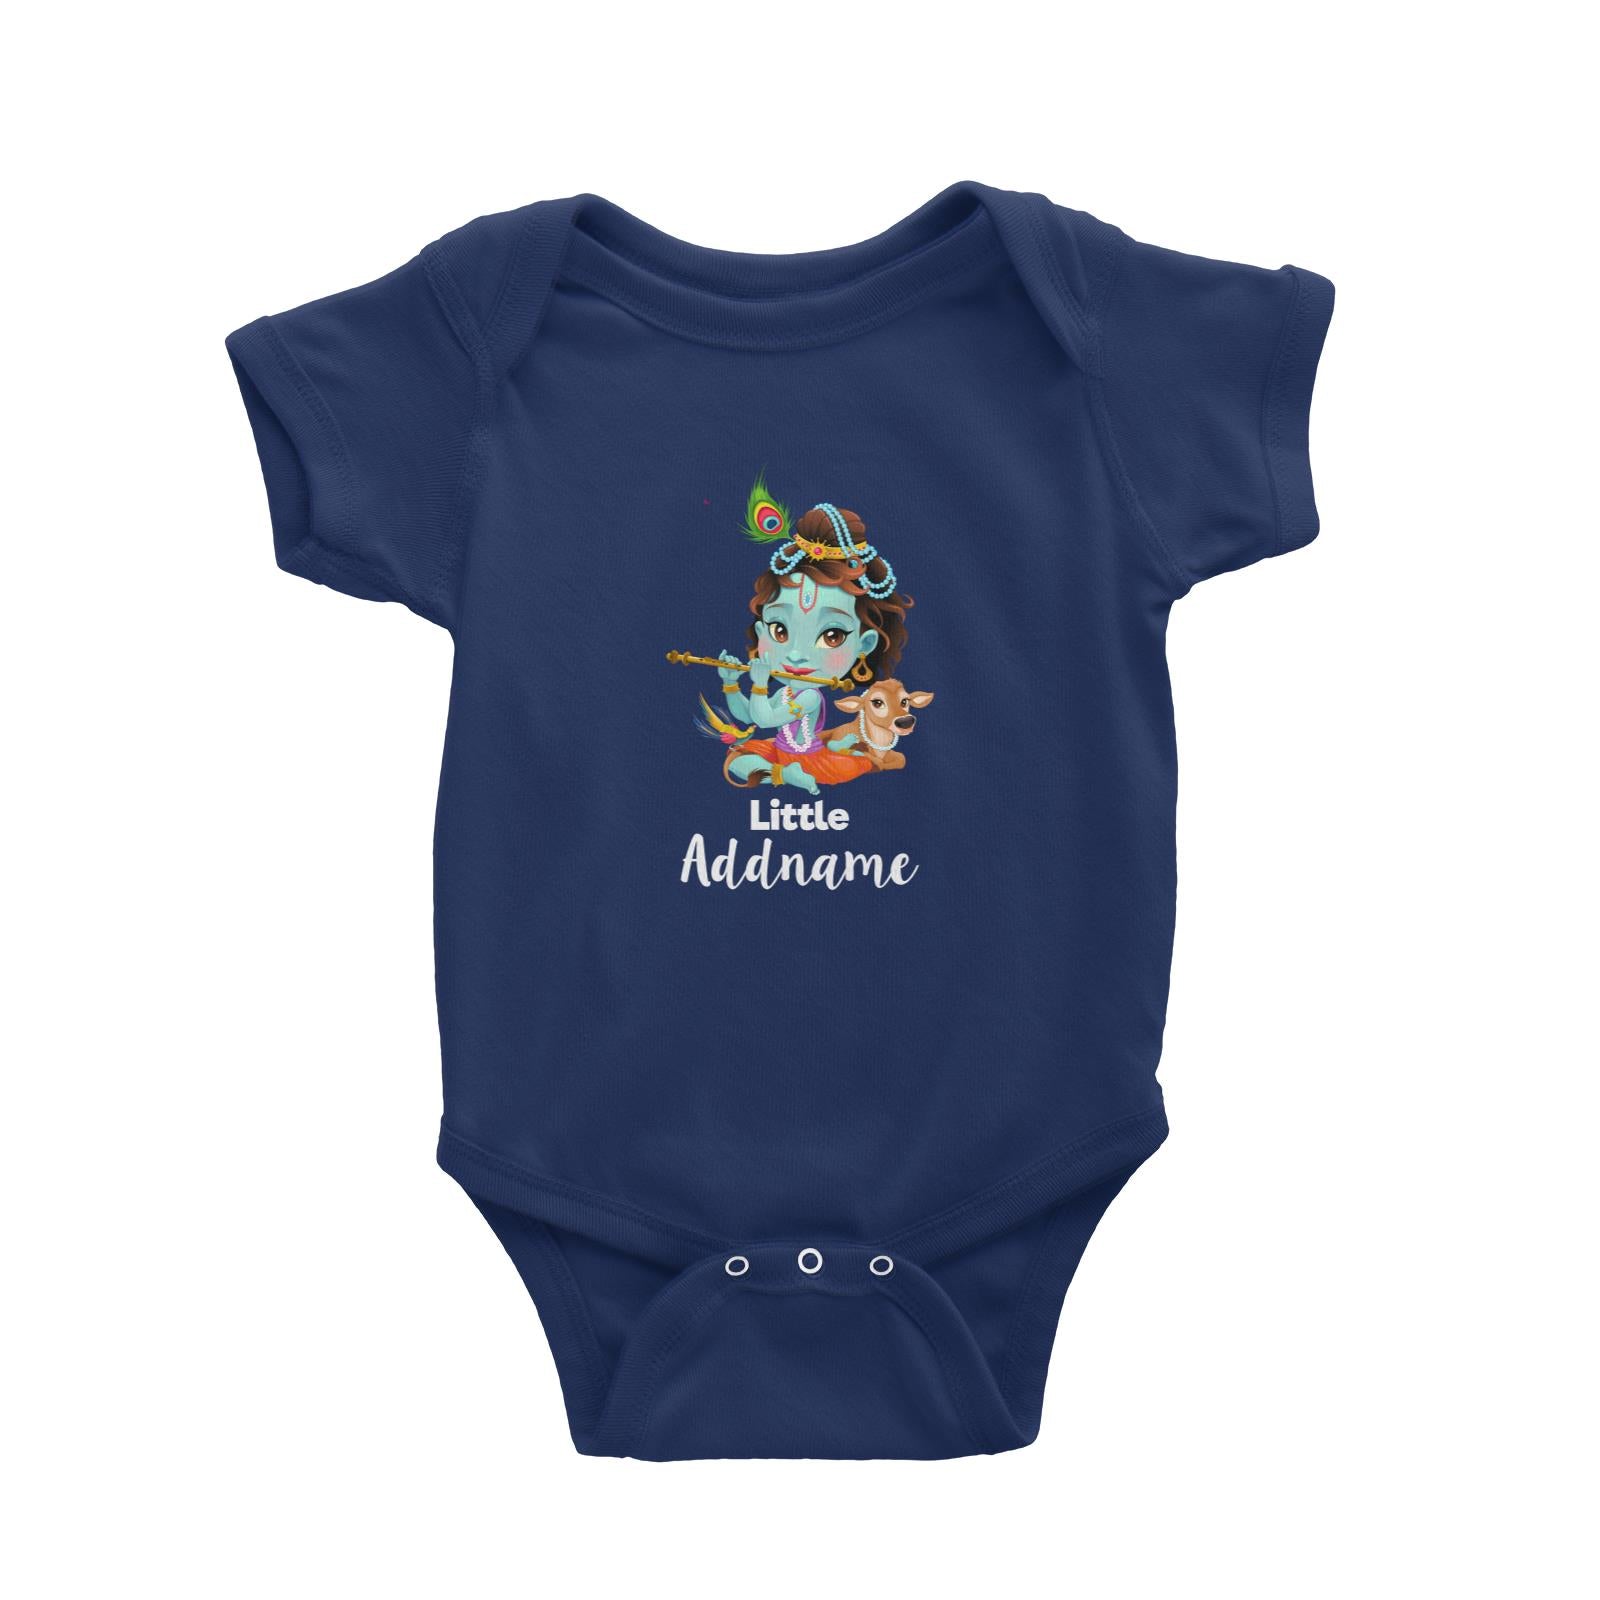 Artistic Krishna Playing Flute with Cow Little Addname Baby Romper